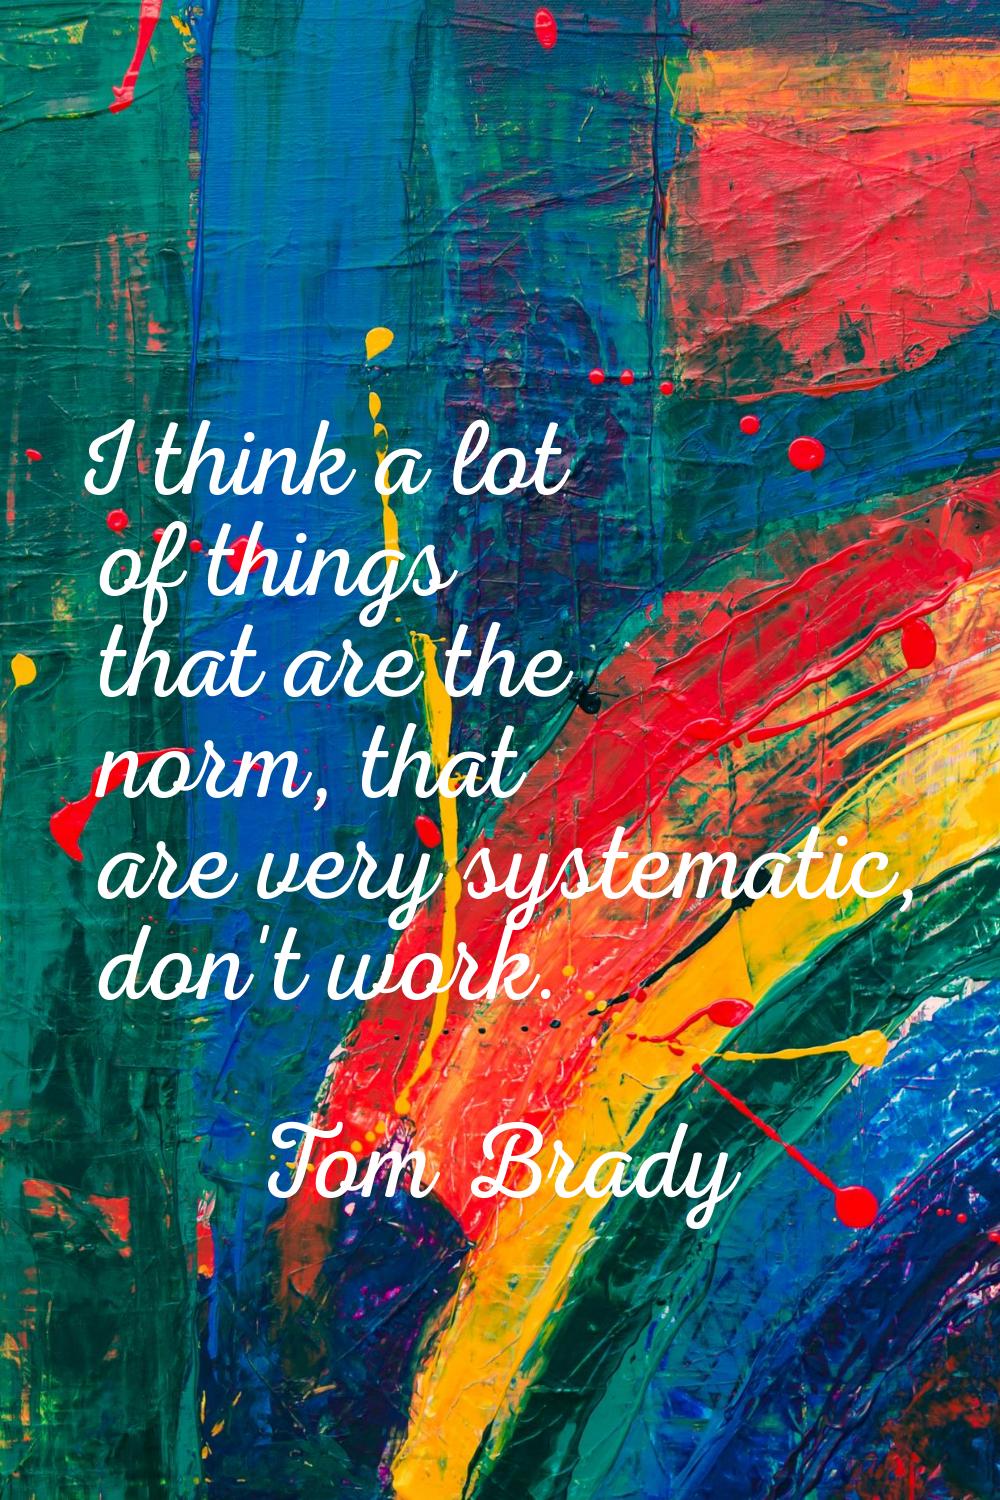 I think a lot of things that are the norm, that are very systematic, don't work.